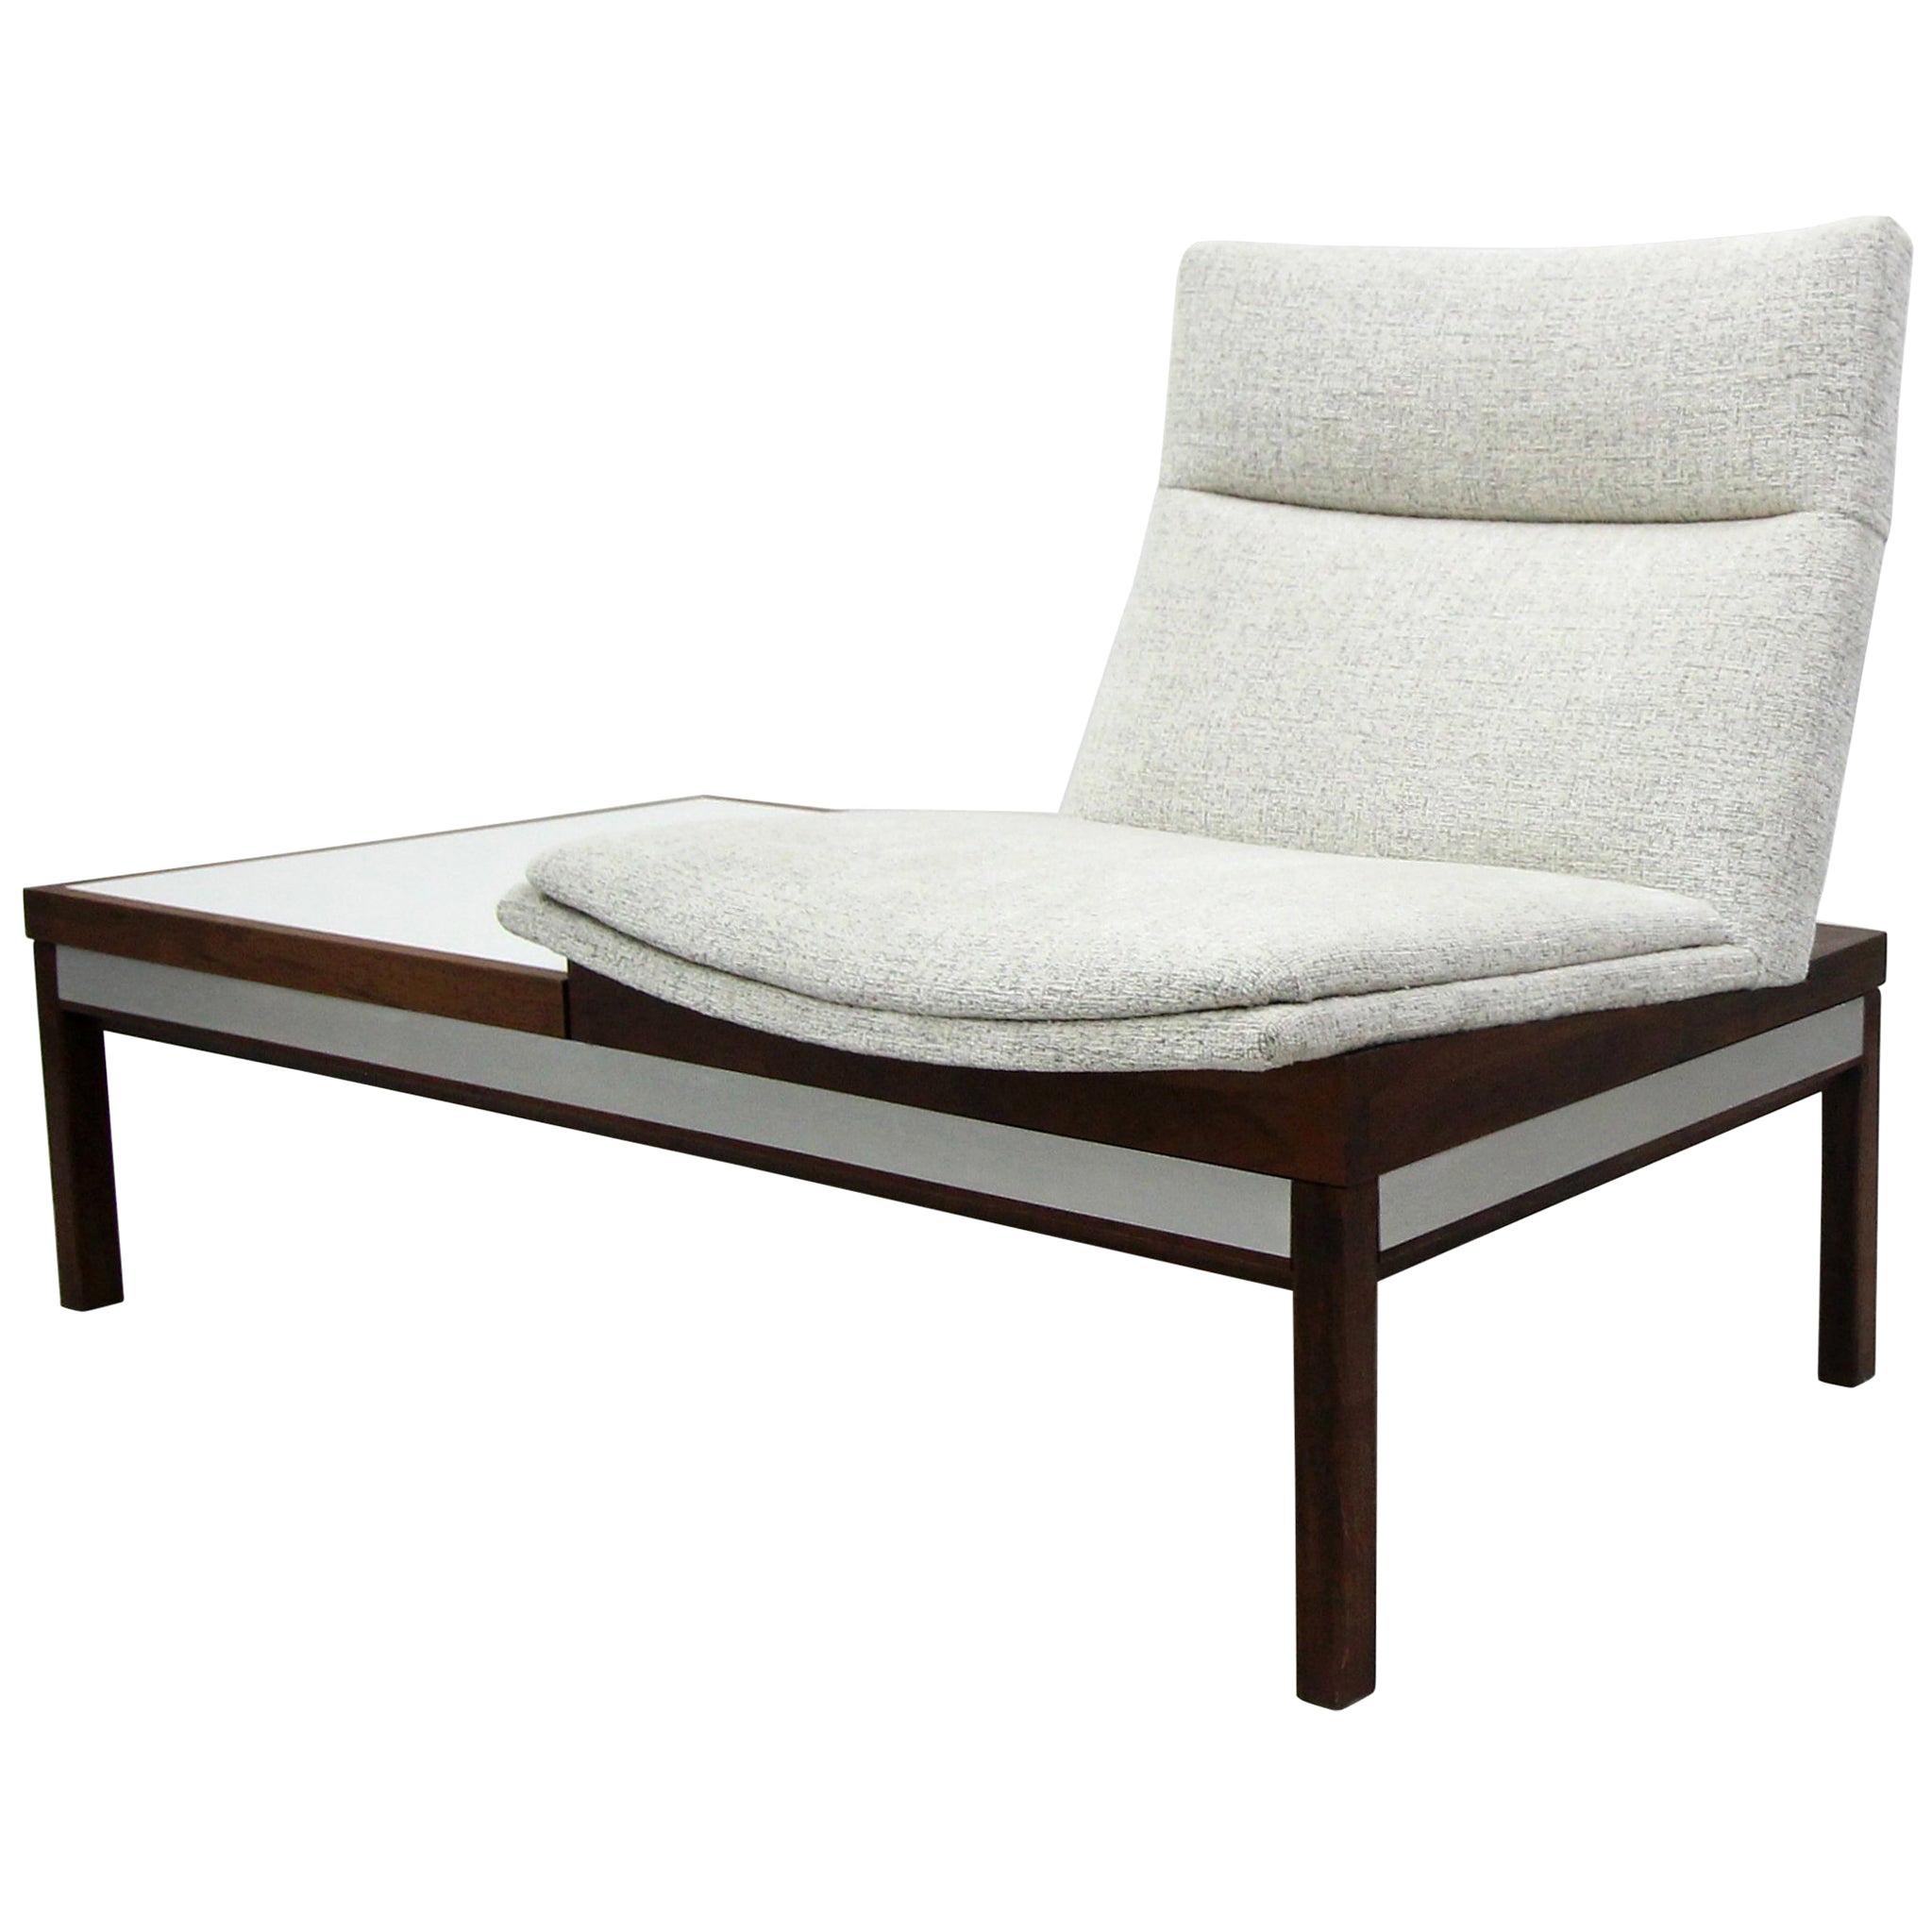 Midcentury Modular Chair and Side Table by Arthur Umanoff for Madison Furniture